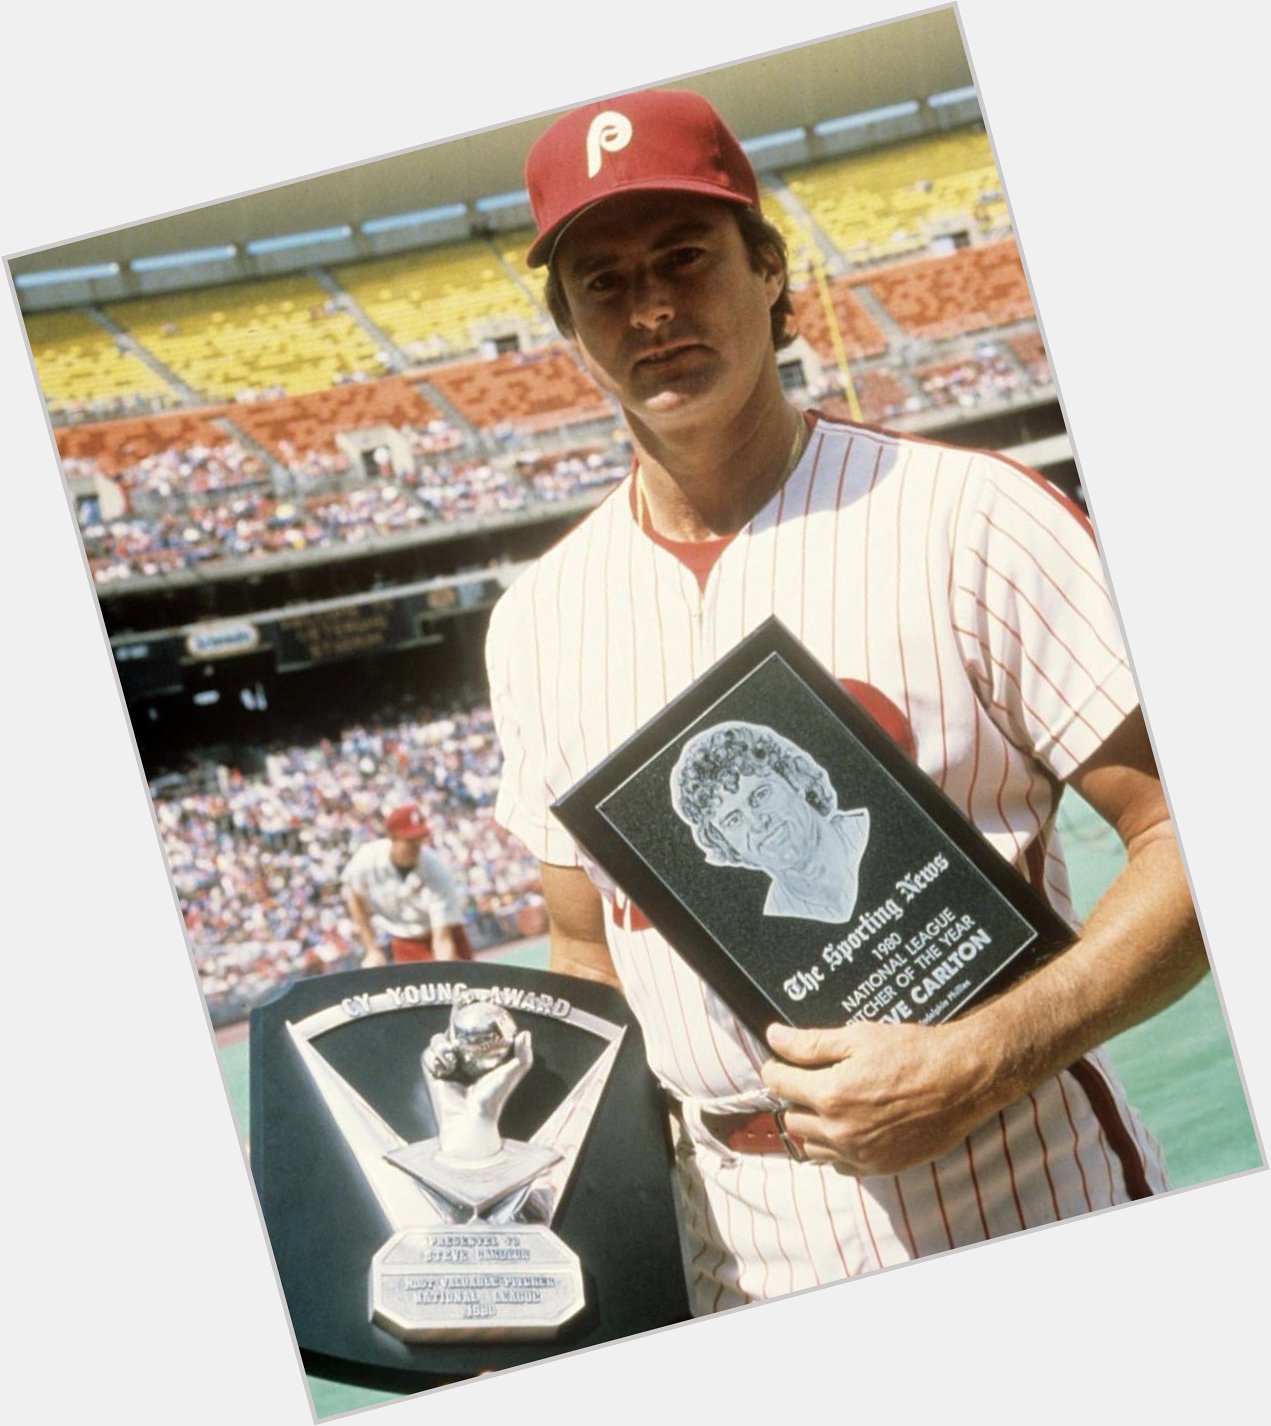 Happy birthday to Steve Carlton, the greatest pitcher I never got to watch live. 